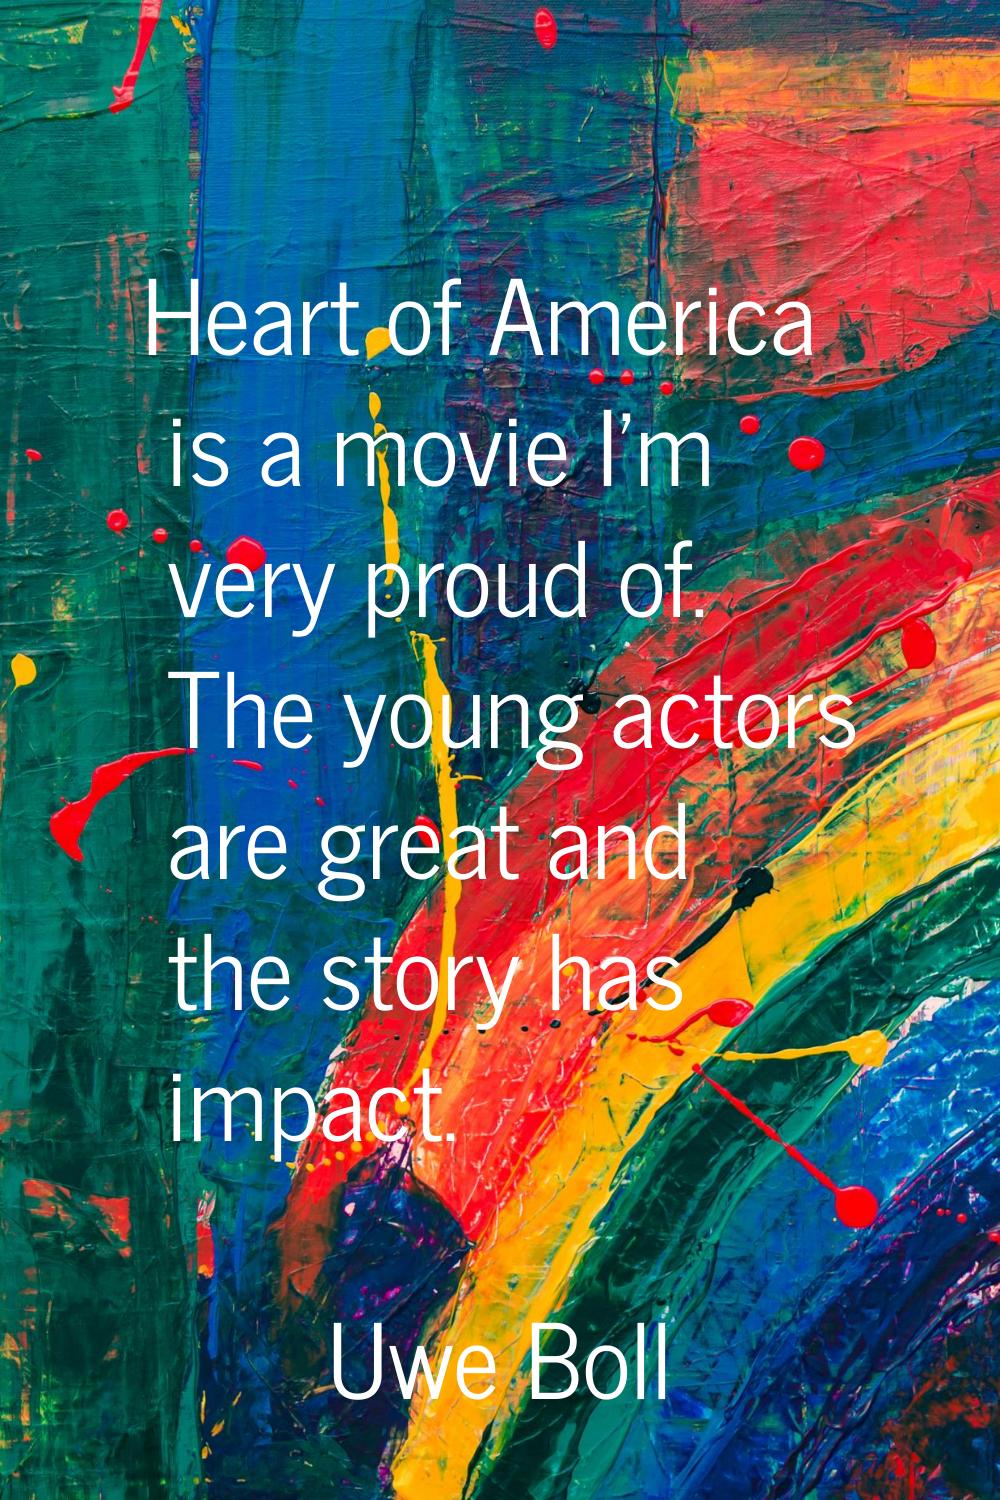 Heart of America is a movie I'm very proud of. The young actors are great and the story has impact.